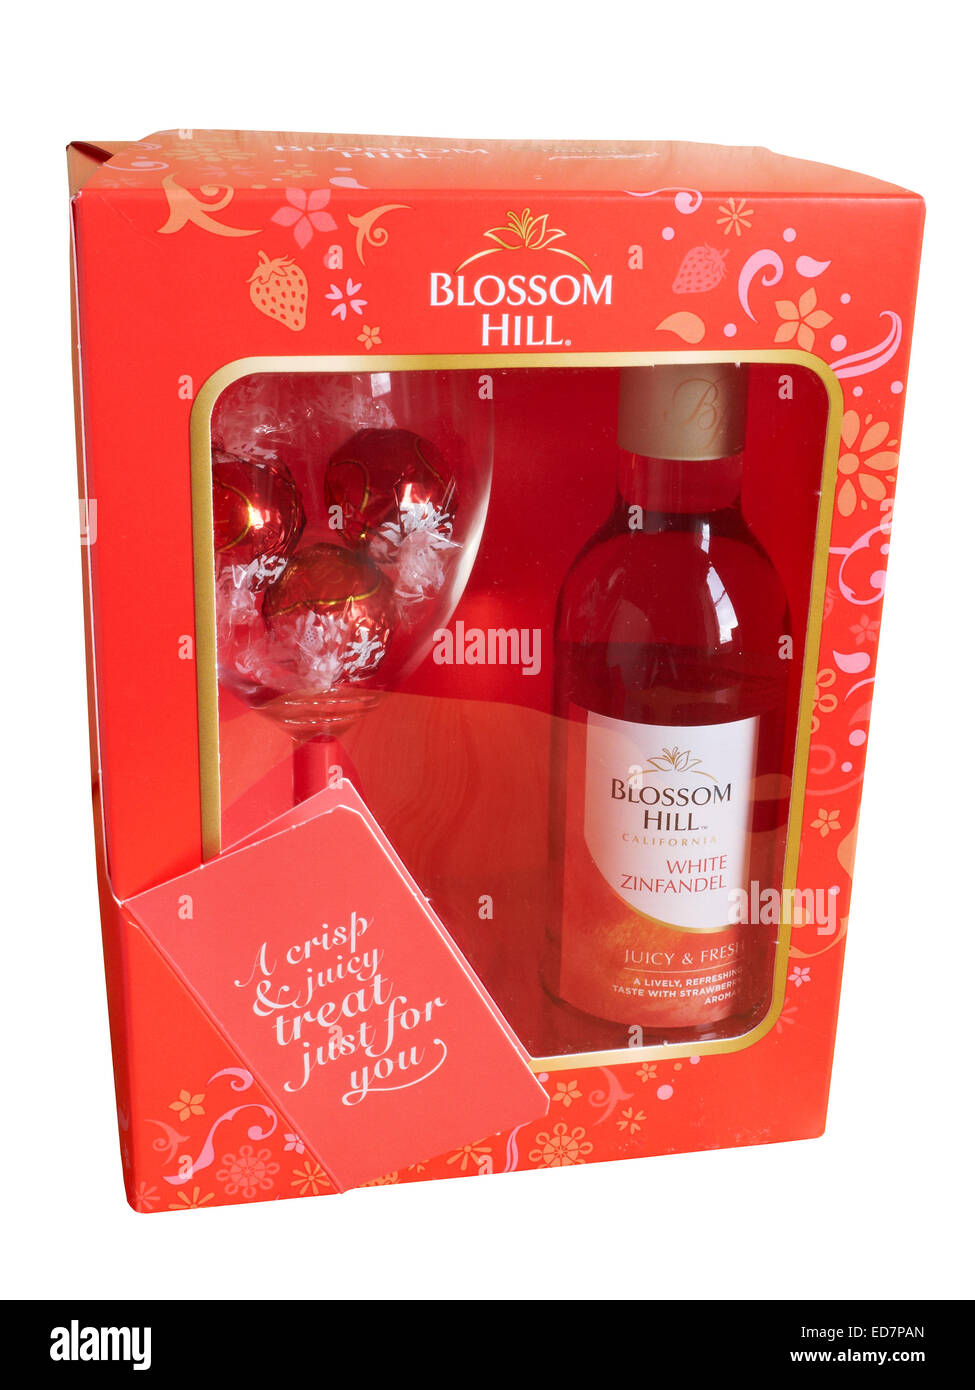 Bottle of Blossom Hill rose in gift box Stock Photo - Alamy